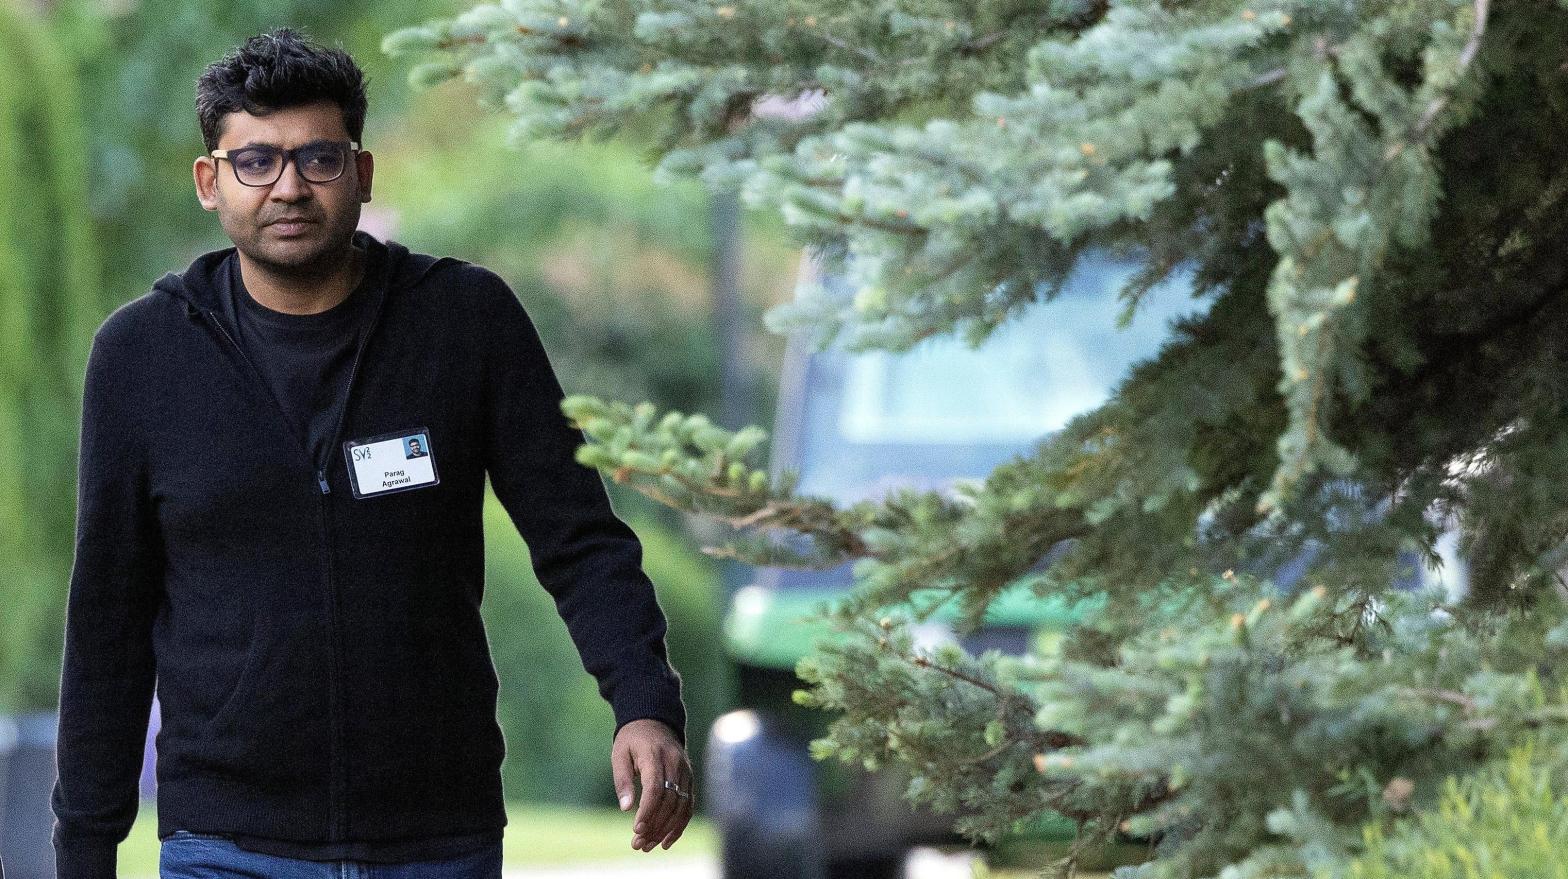 Parag Agrawal, the former CEO of Twitter, at the Allen & Company Sun Valley Conference in Idaho.  (Image: Kevin Dietsch, Getty Images)